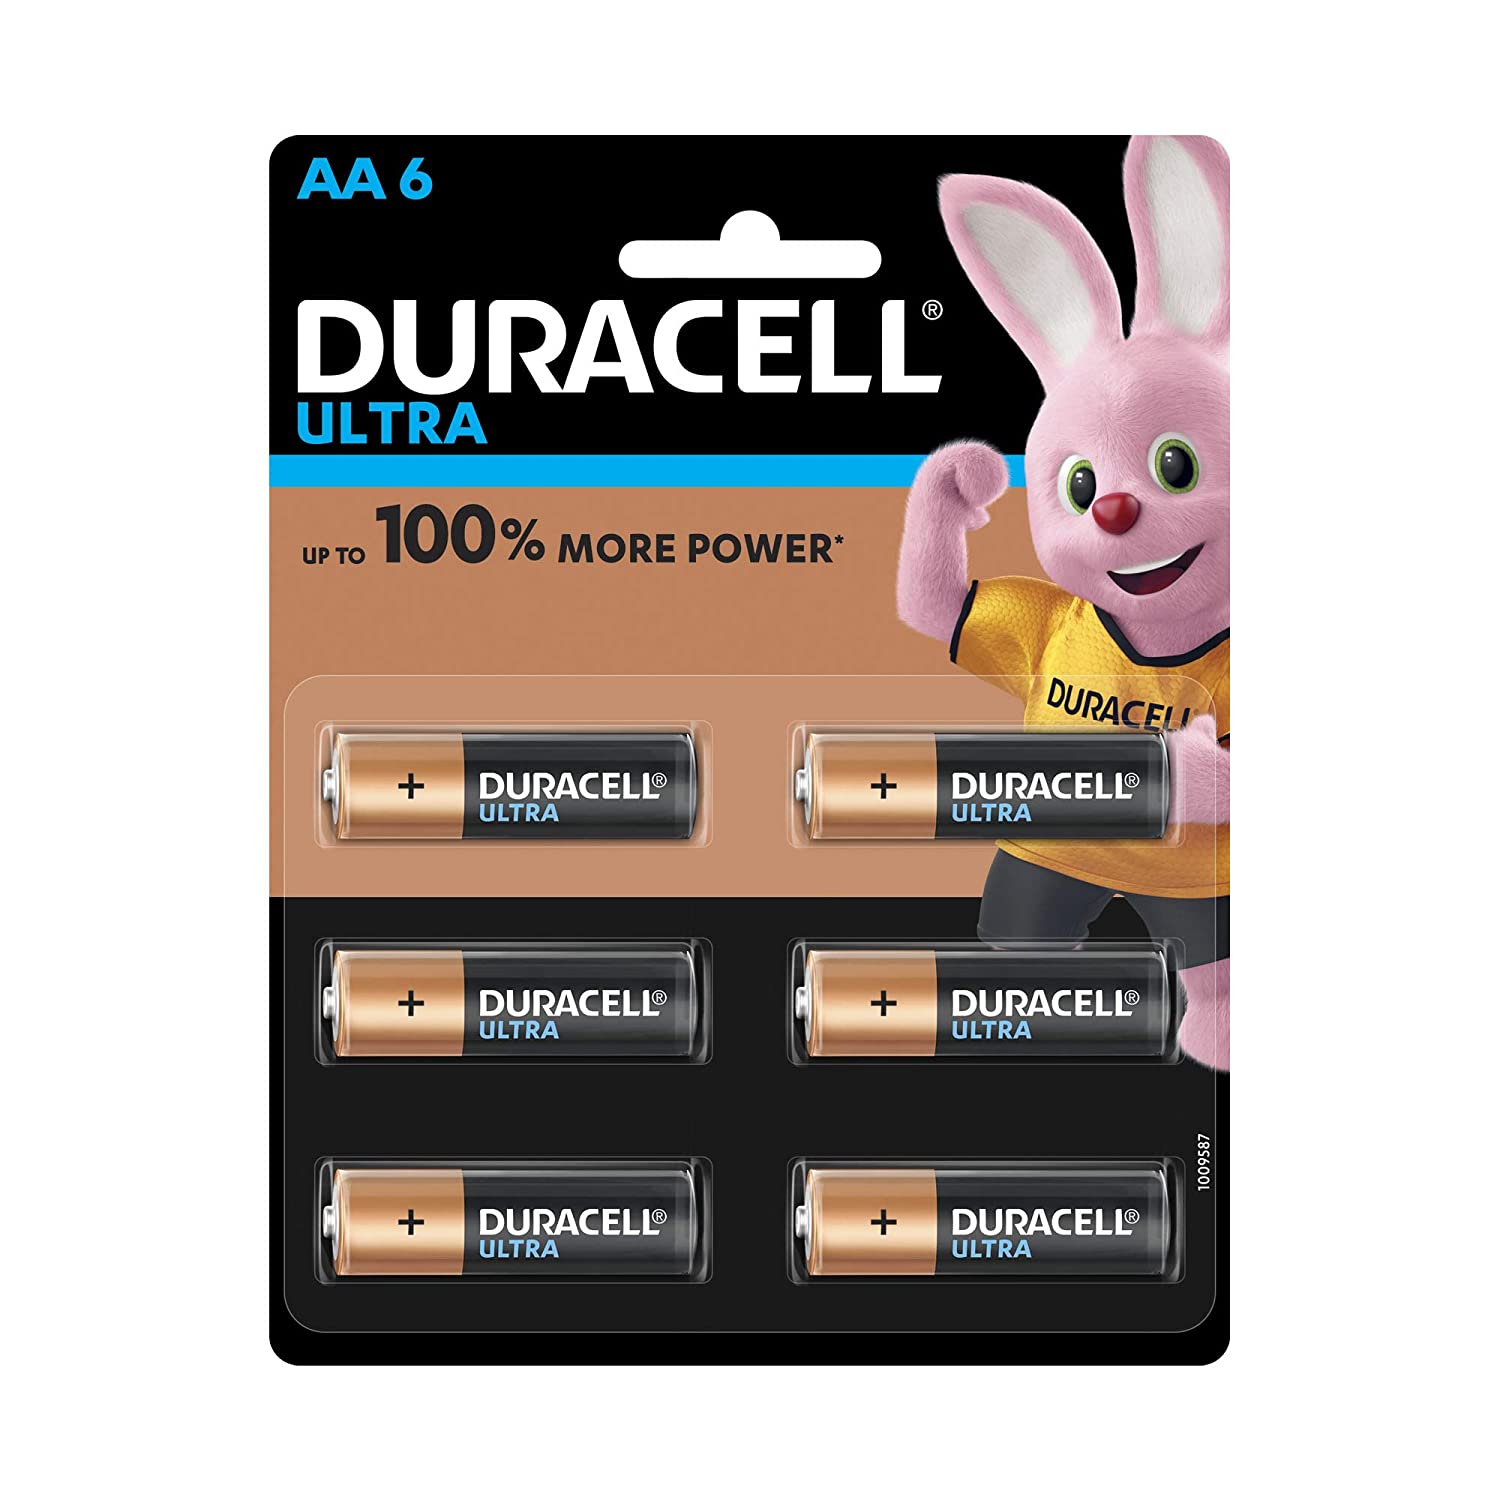 Duracell Ultra Alkaline AA Batteries - Pack of 2 (6 Cell Per Pack)